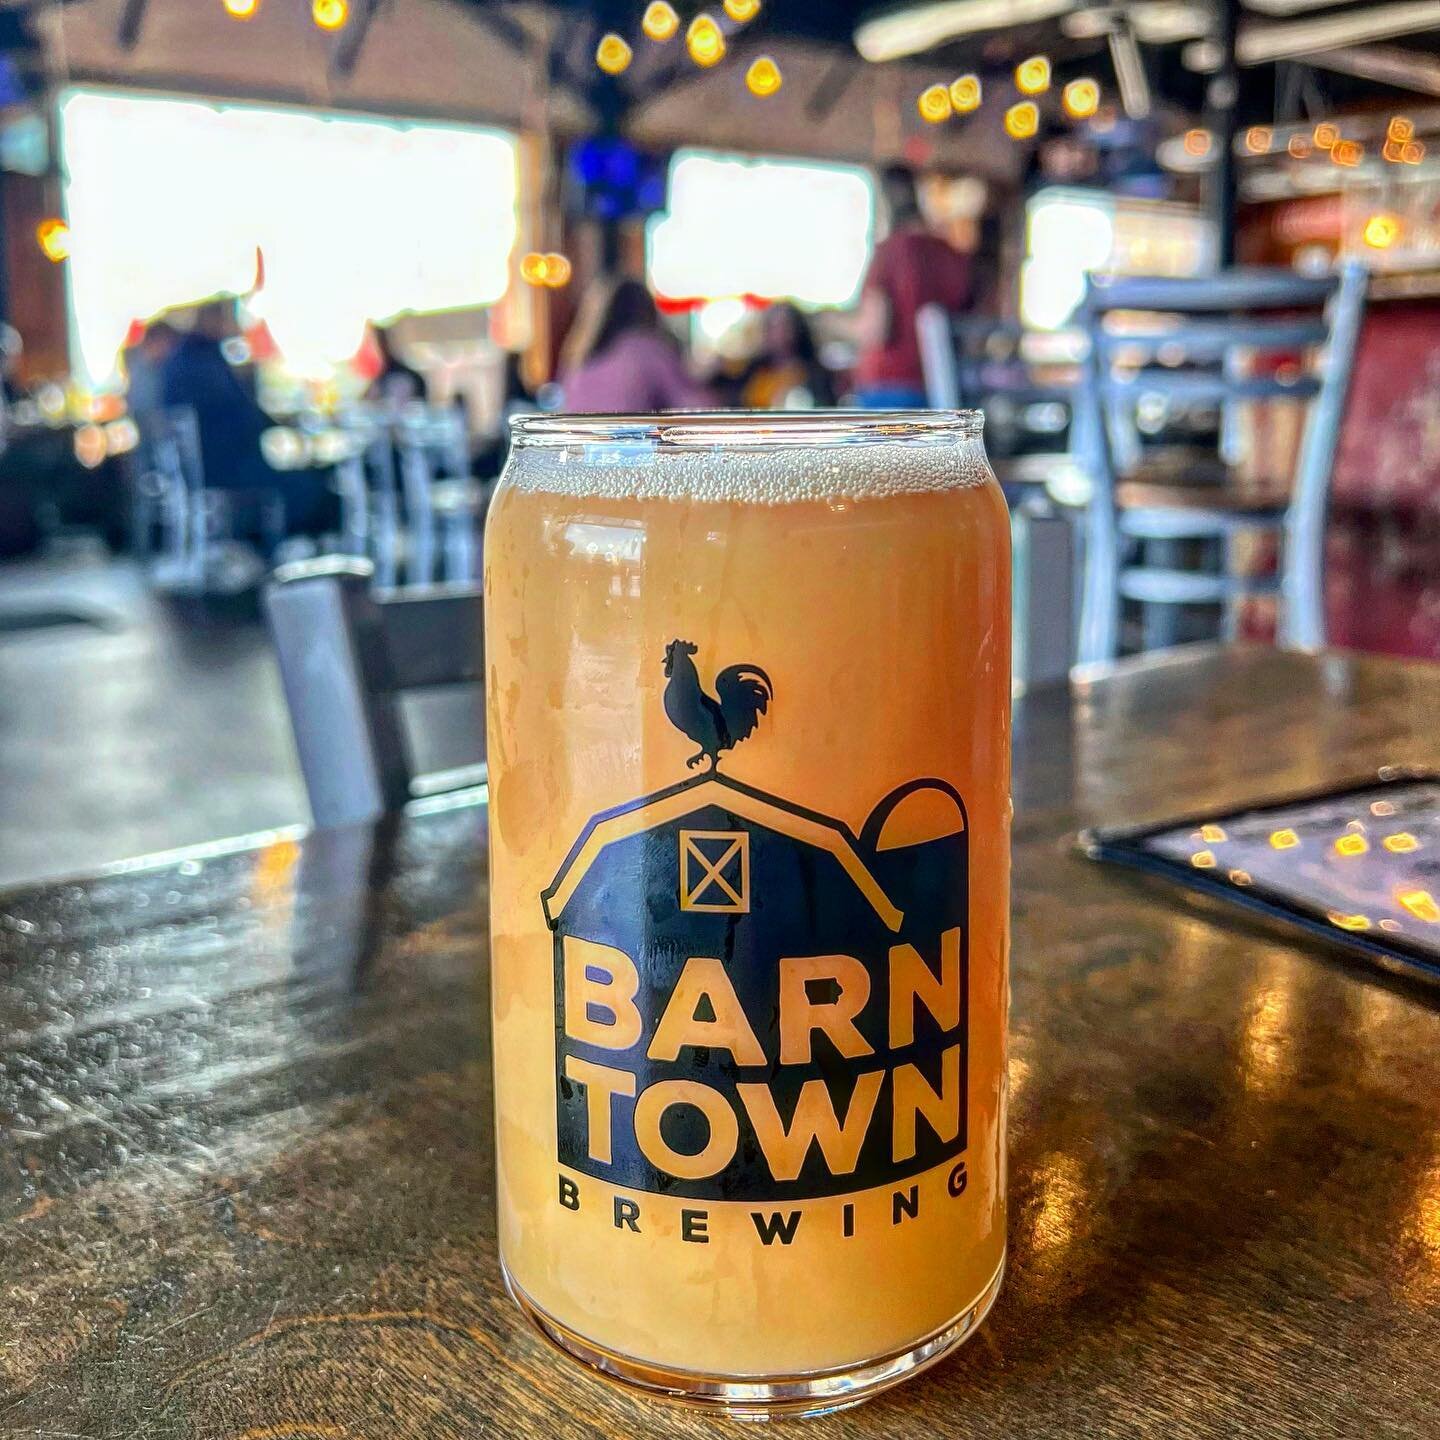 We encountered everything from lemon, orange, apple, tangerine, and grapefruit thrown about in the various recipes and brewing styles at @barntownbrewing! Our favorite brews here all featured their fruits, including their flagship IPA Groovy Ruby whi